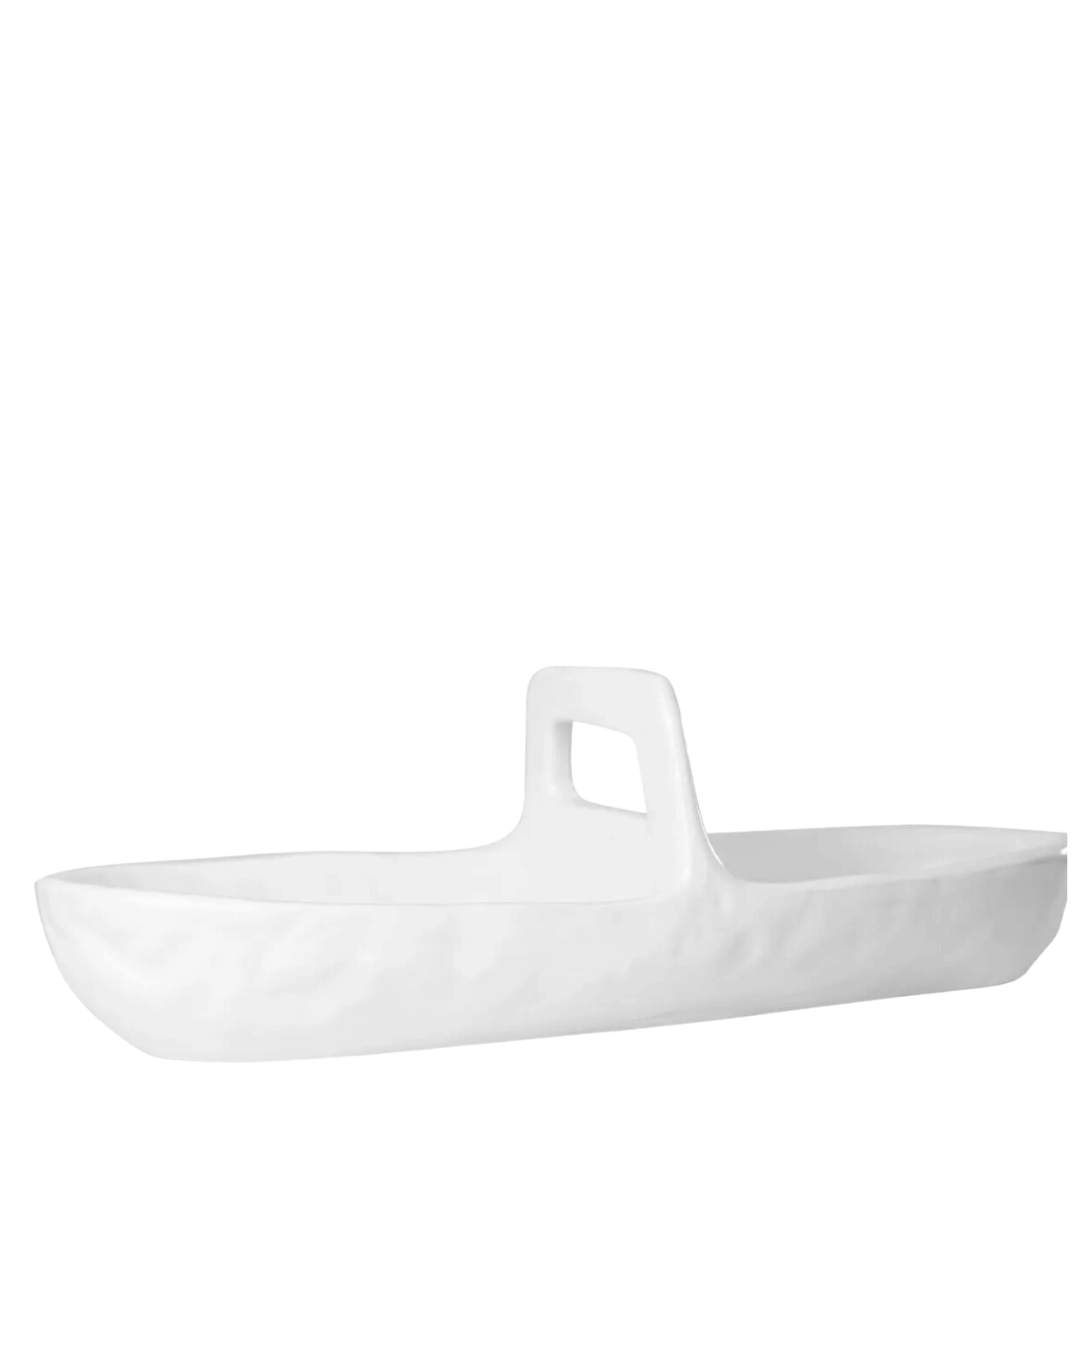 A plain white ceramic serving dish shaped like a canoe, featuring a built-in handle and Arizona style, isolated on a white background - Appetizer Platter No. 774 by Montes Doggett.